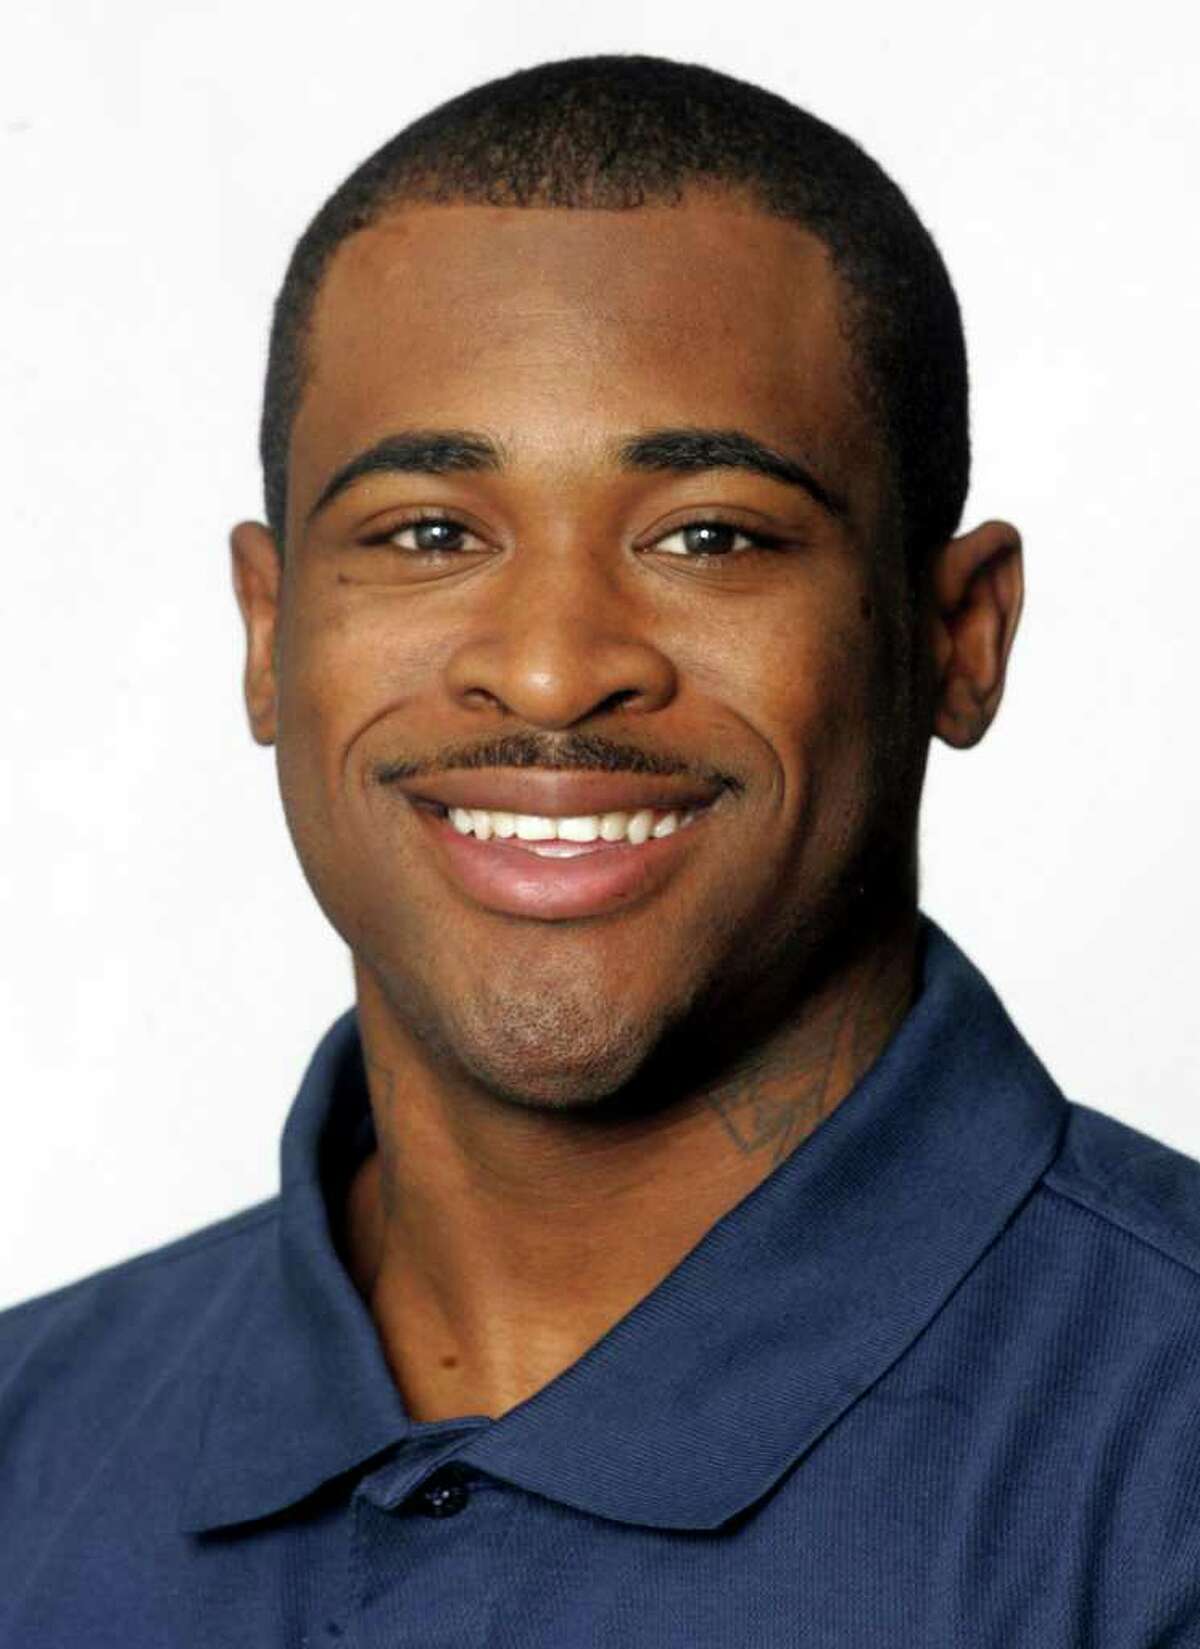 FILE - This undated file photo provided by the University of Connecticut shows football player Jasper Howard. John Lomax III is scheduled to be sentenced Friday, March 25, 2011 in Rockville Superior Court, in Vernon, Conn., to a reduced charge of first-degree manslaughter for killing Howard. (AP Photo/University of Connecticut, File) NO SALES